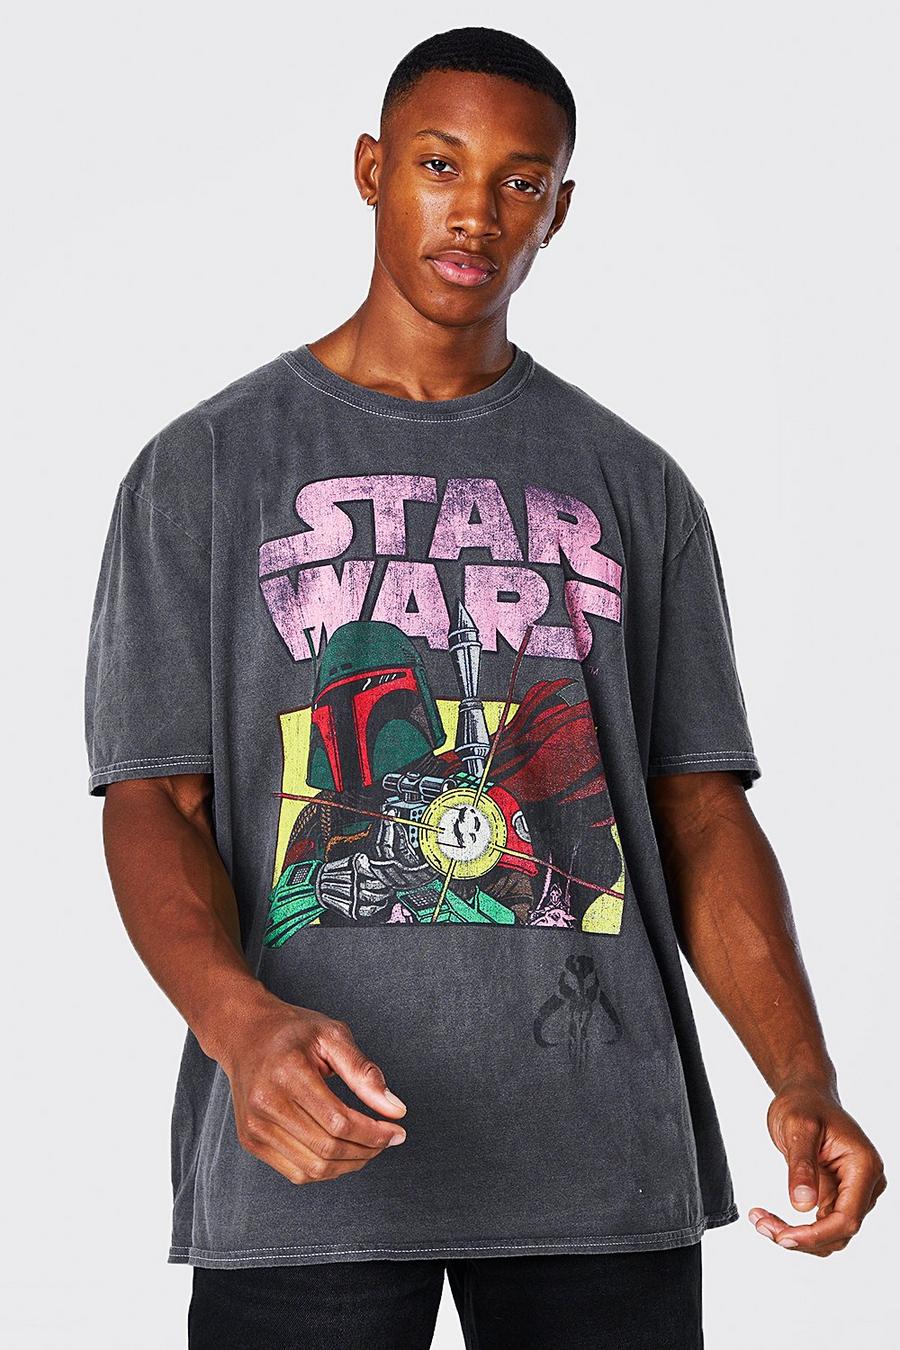 T-shirt oversize ufficiale Star Wars in lavaggio acido, Charcoal